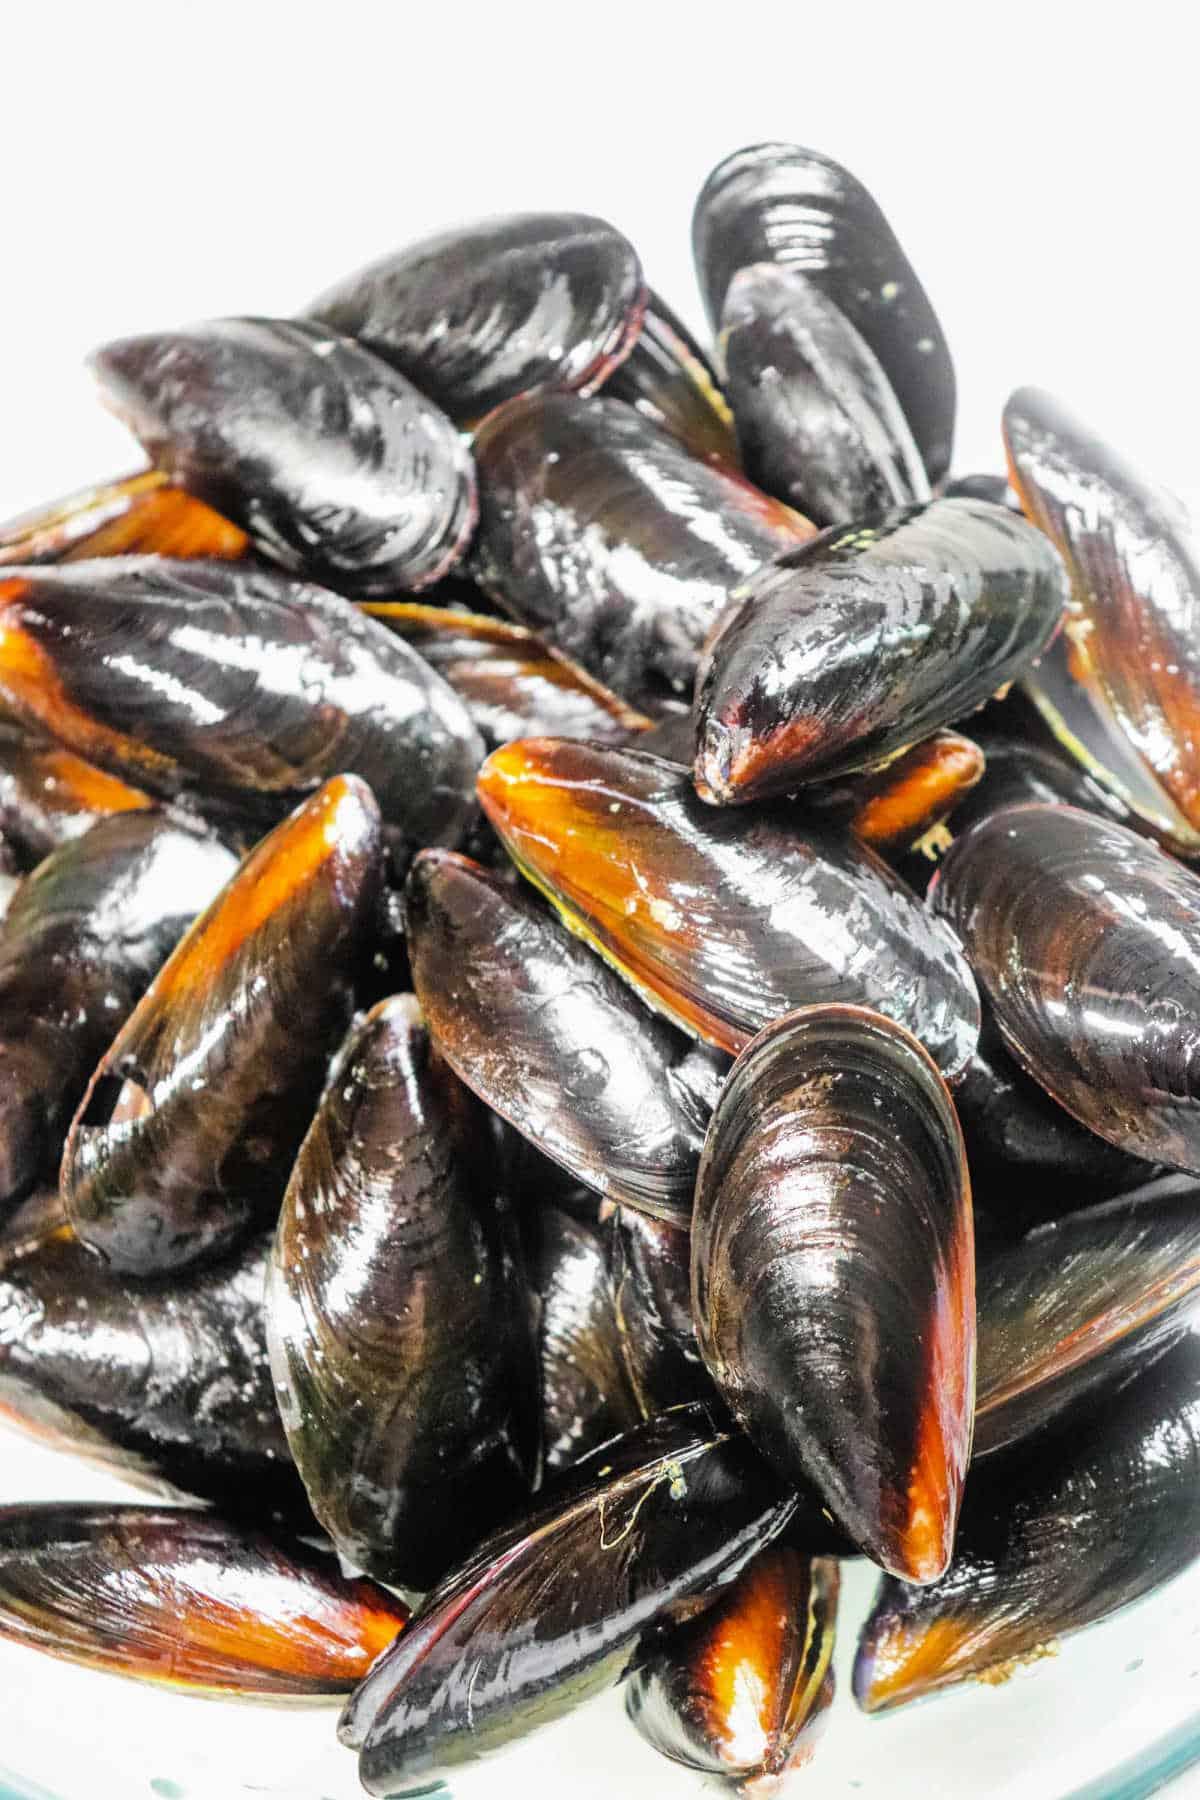 How to Open Mussels After Cooking